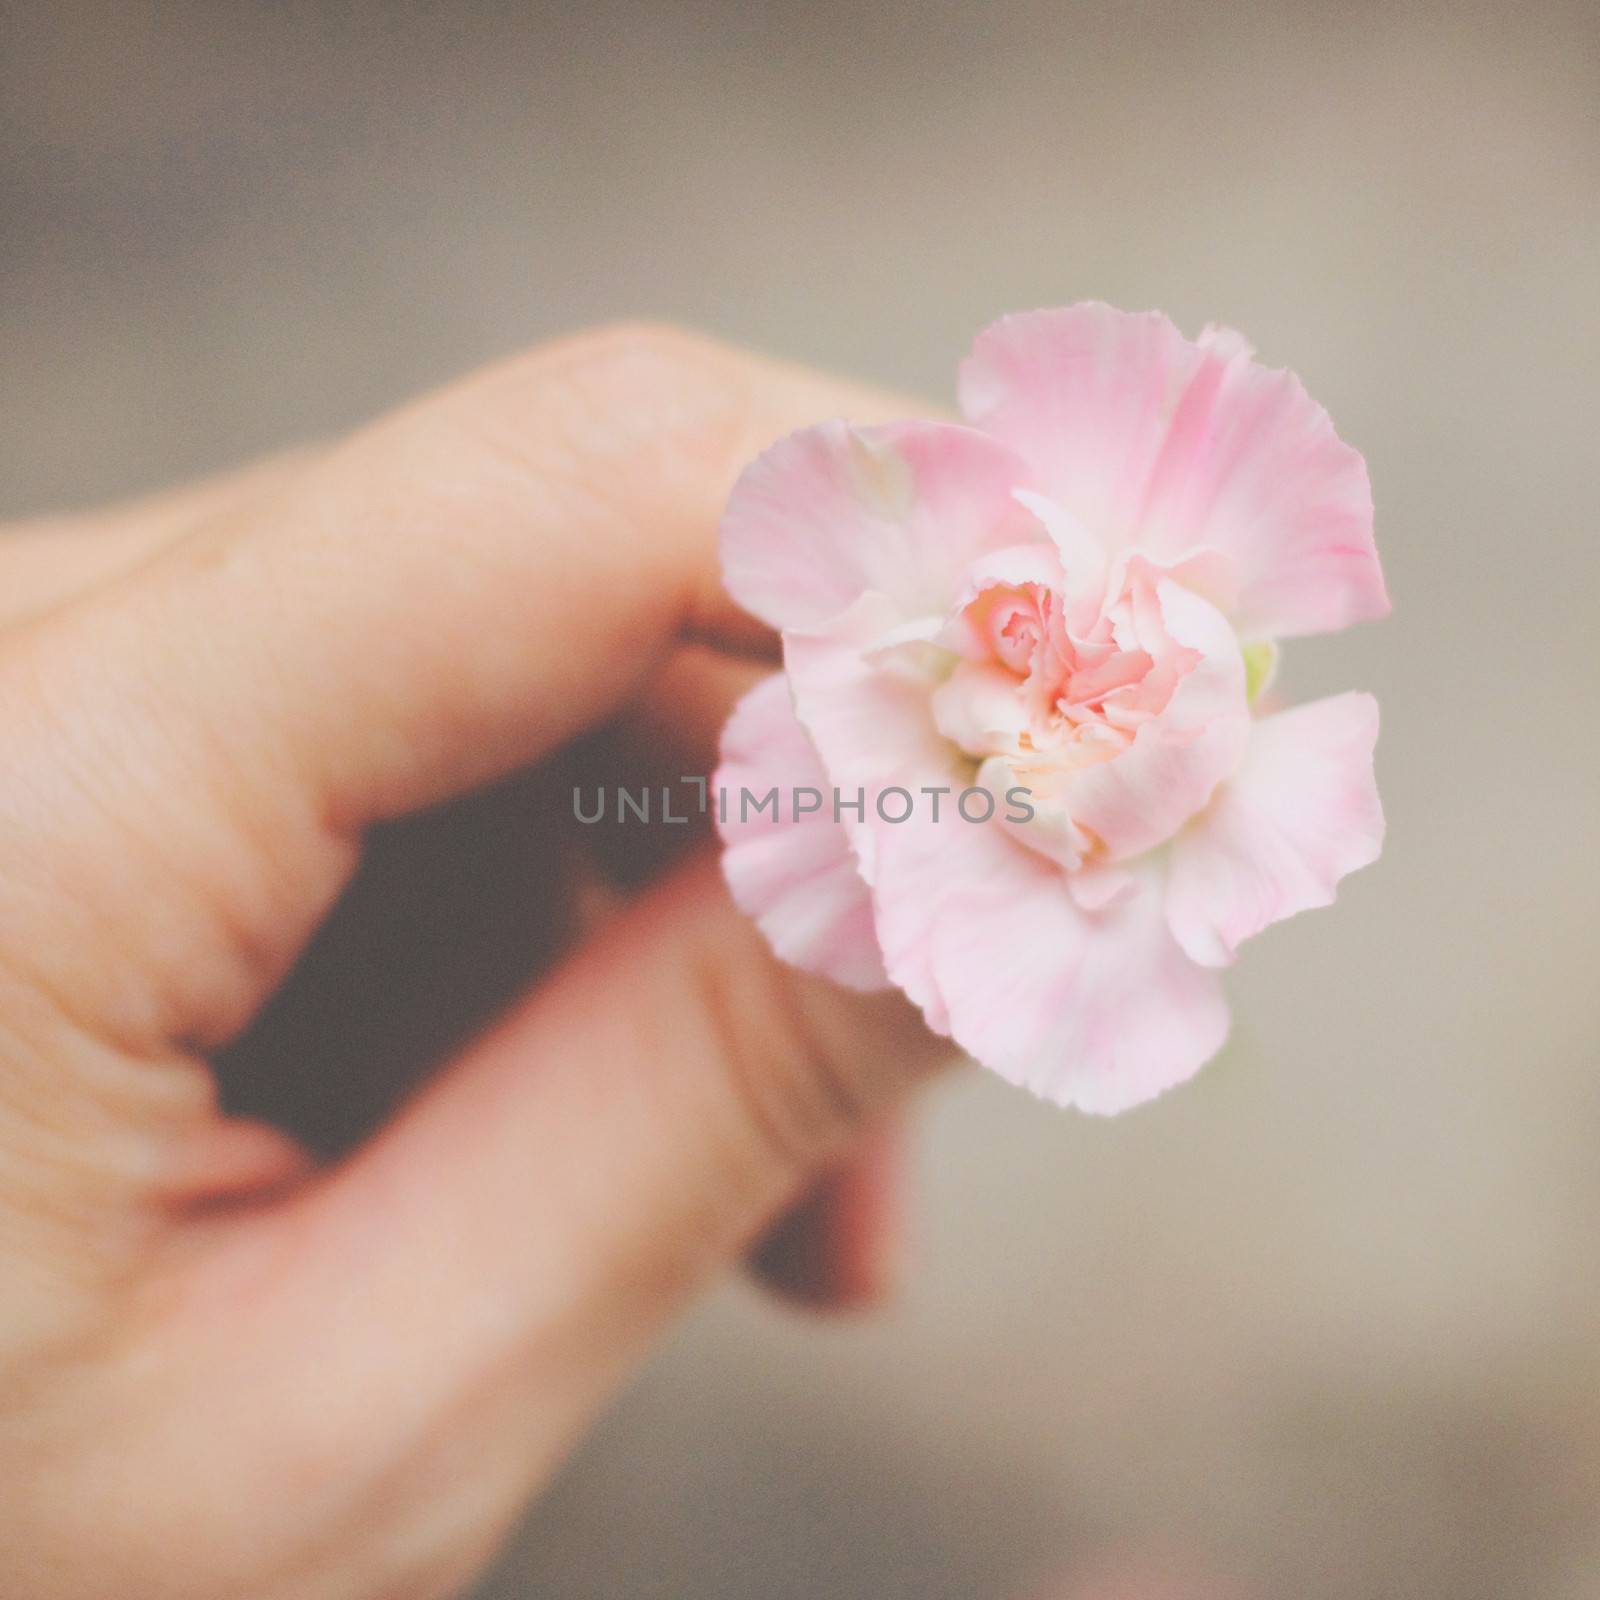 Hand holding pink flower with retro filter effect by nuchylee